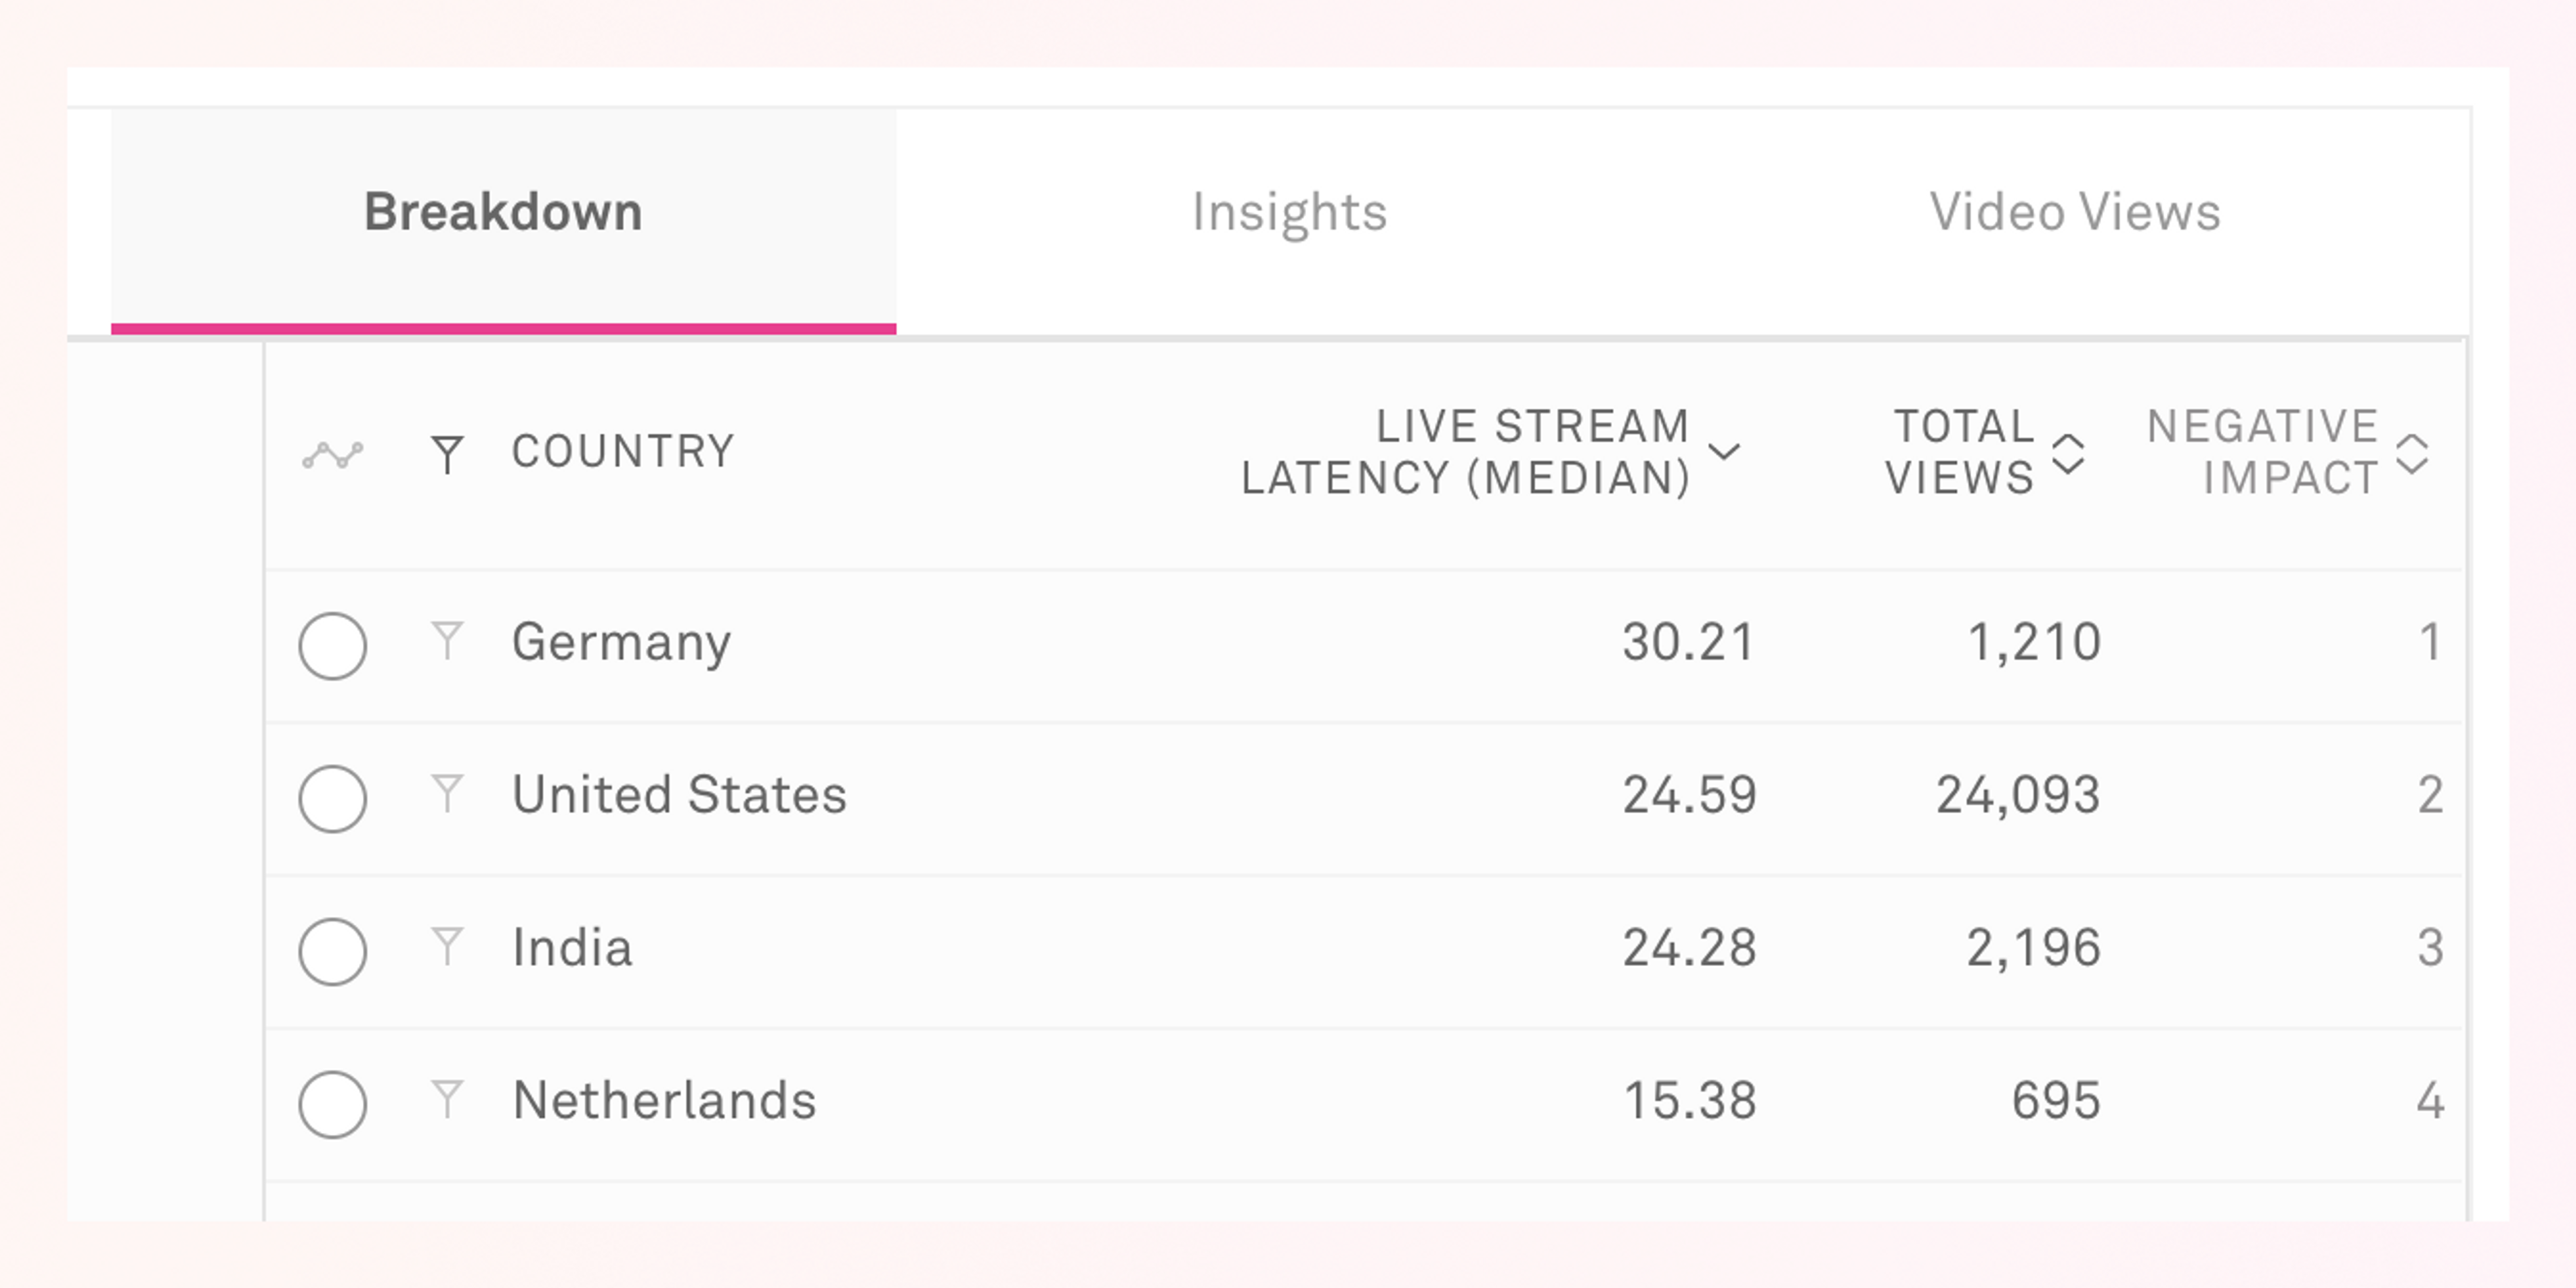 Table showing live stream latency measurements by country